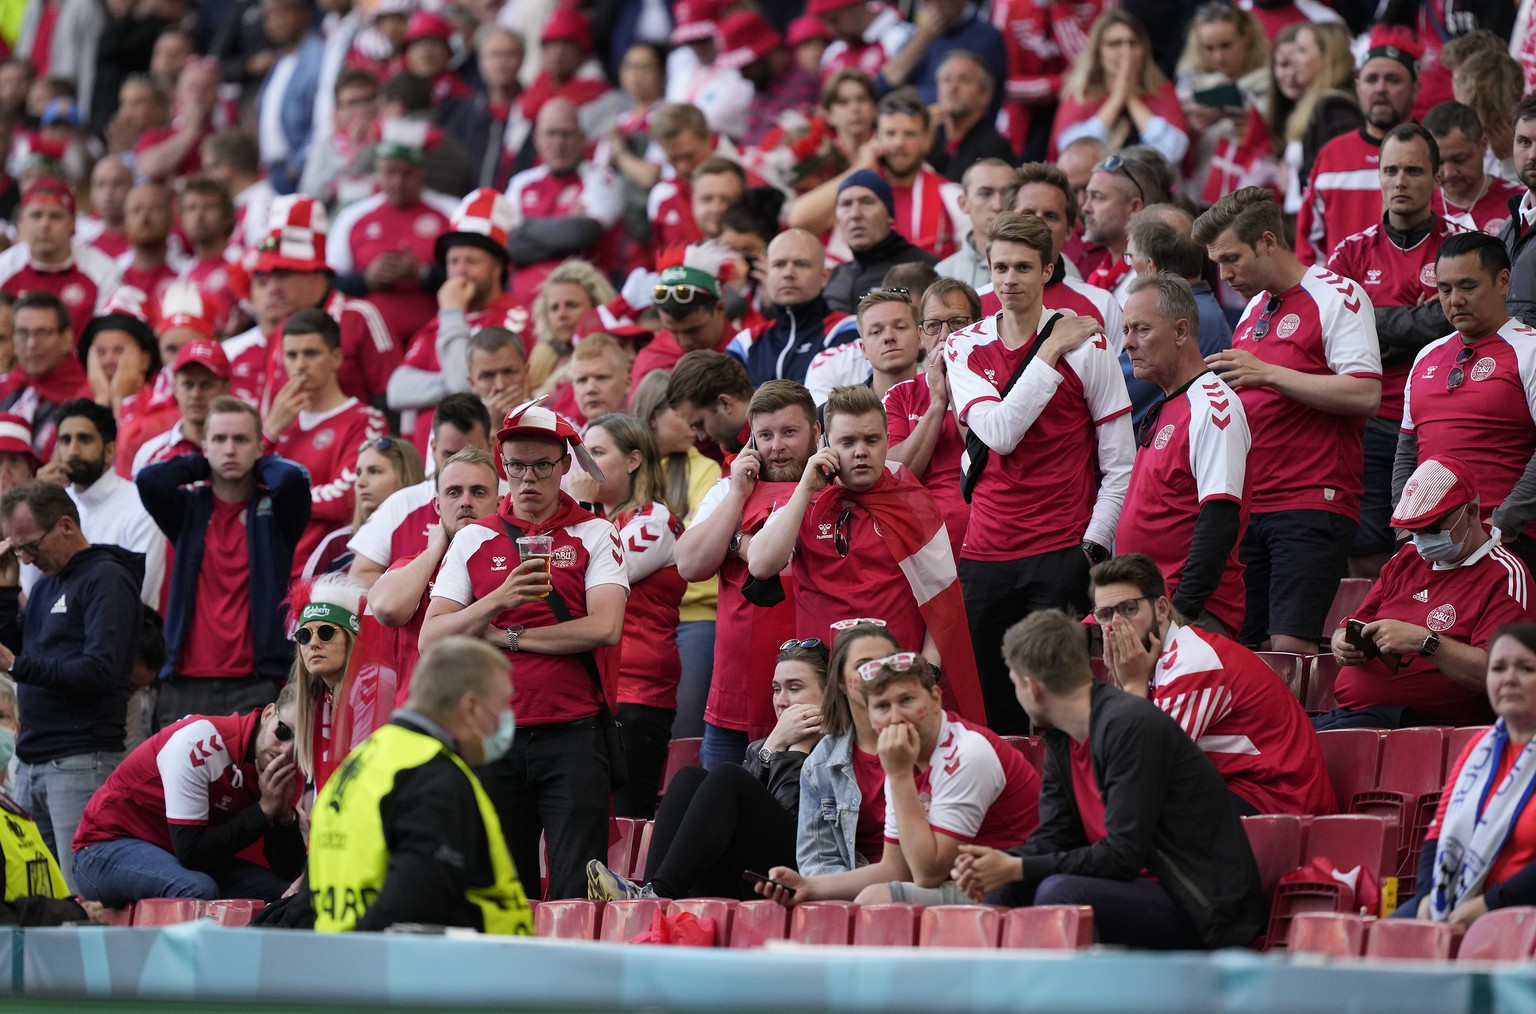 epa09265377 Denmark fans react while Christian Eriksen (not seen) of Denmark receives medical assistance during the UEFA EURO 2020 group B preliminary round soccer match between Denmark and Finland in ...